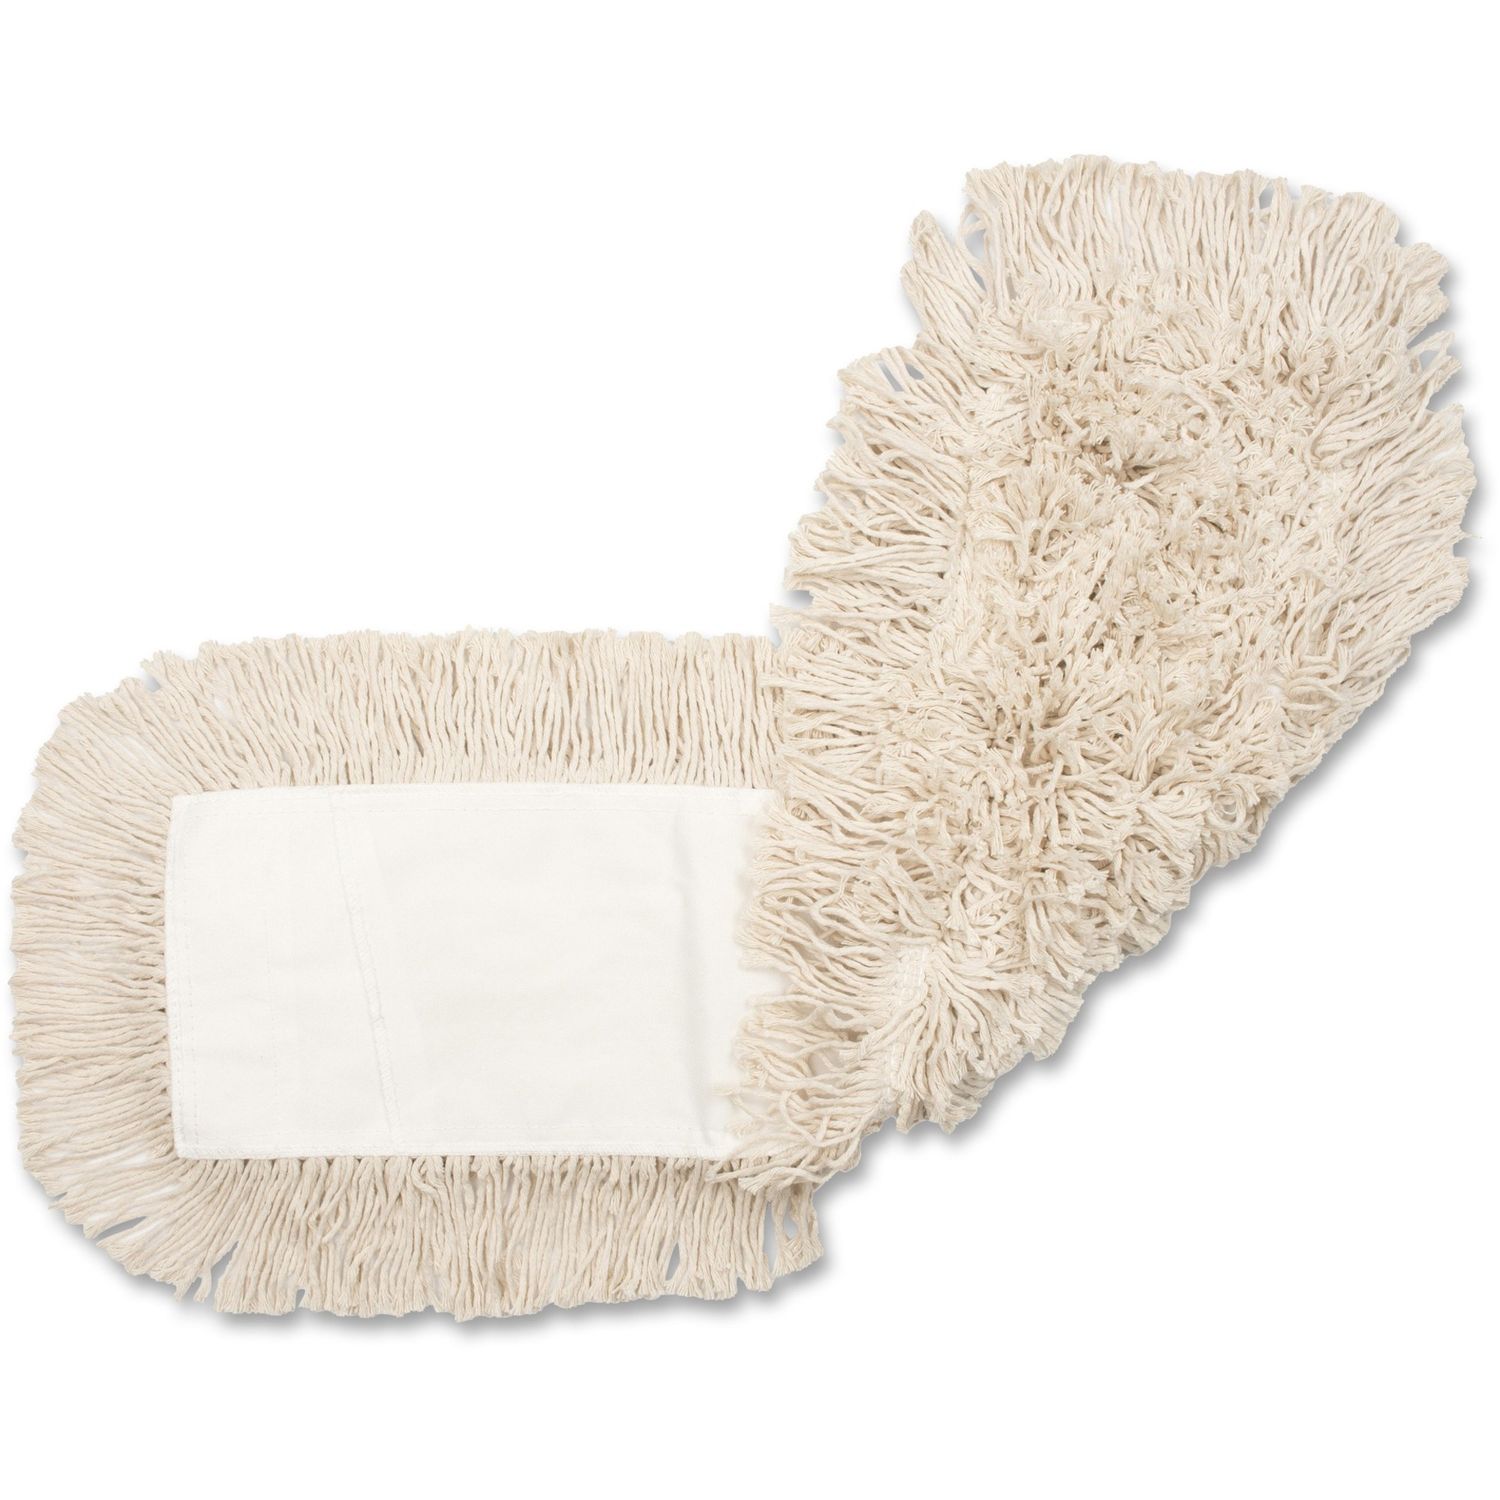 GJO18500 Disposable Dust Mop Refill, 1 Each, Natural, 5" Width x 18" Length, Cotton, Synthetic